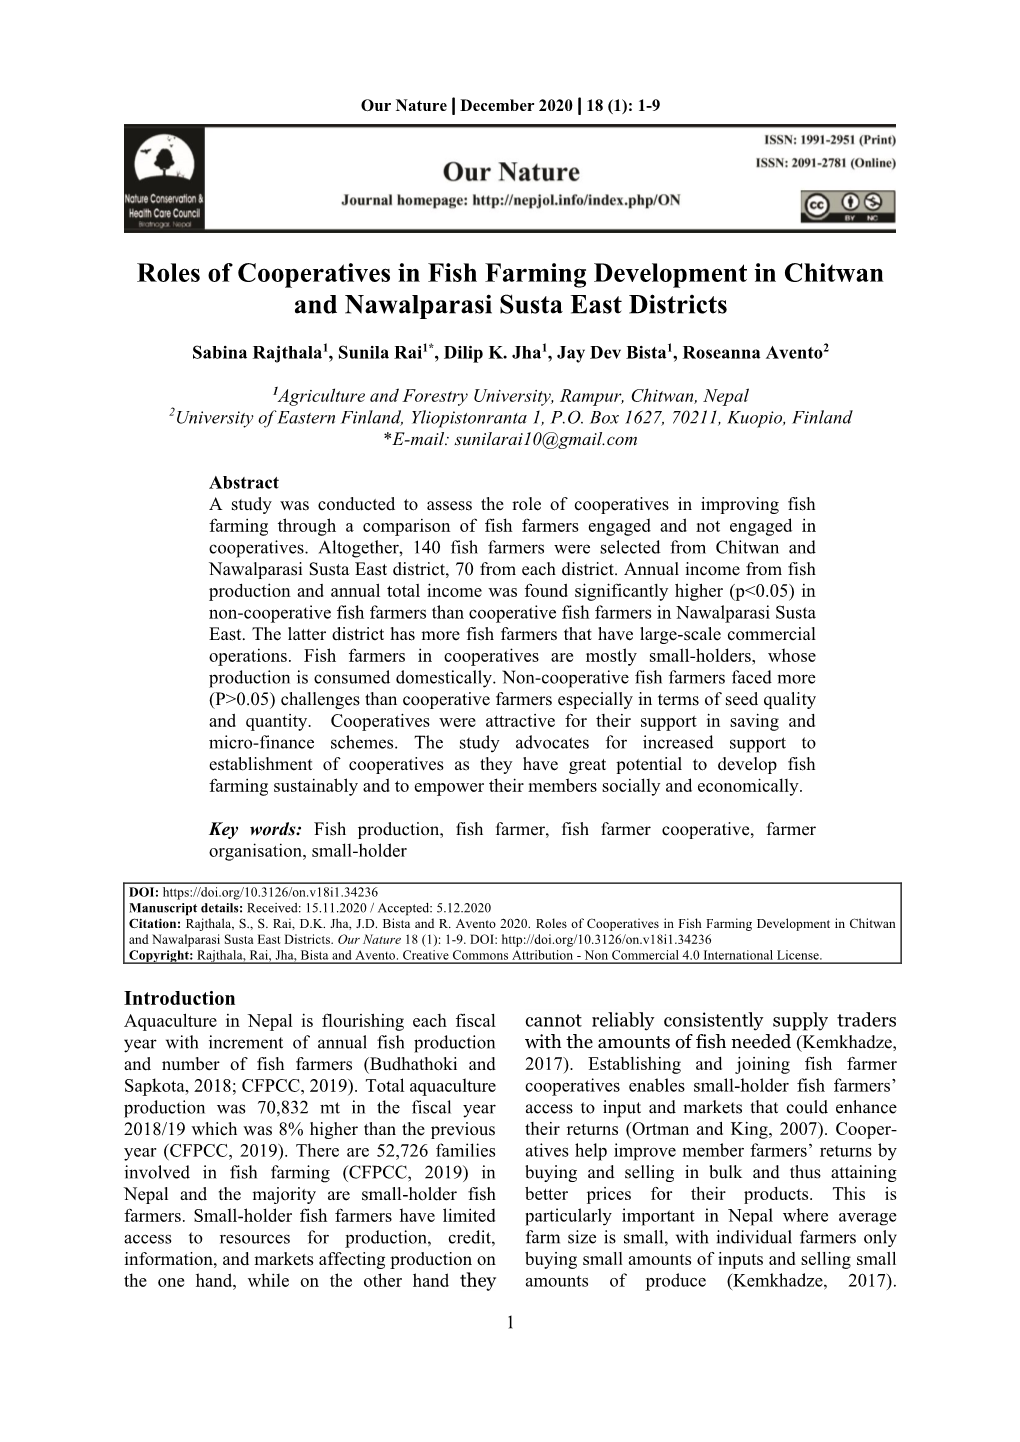 Roles of Cooperatives in Fish Farming Development in Chitwan and Nawalparasi Susta East Districts